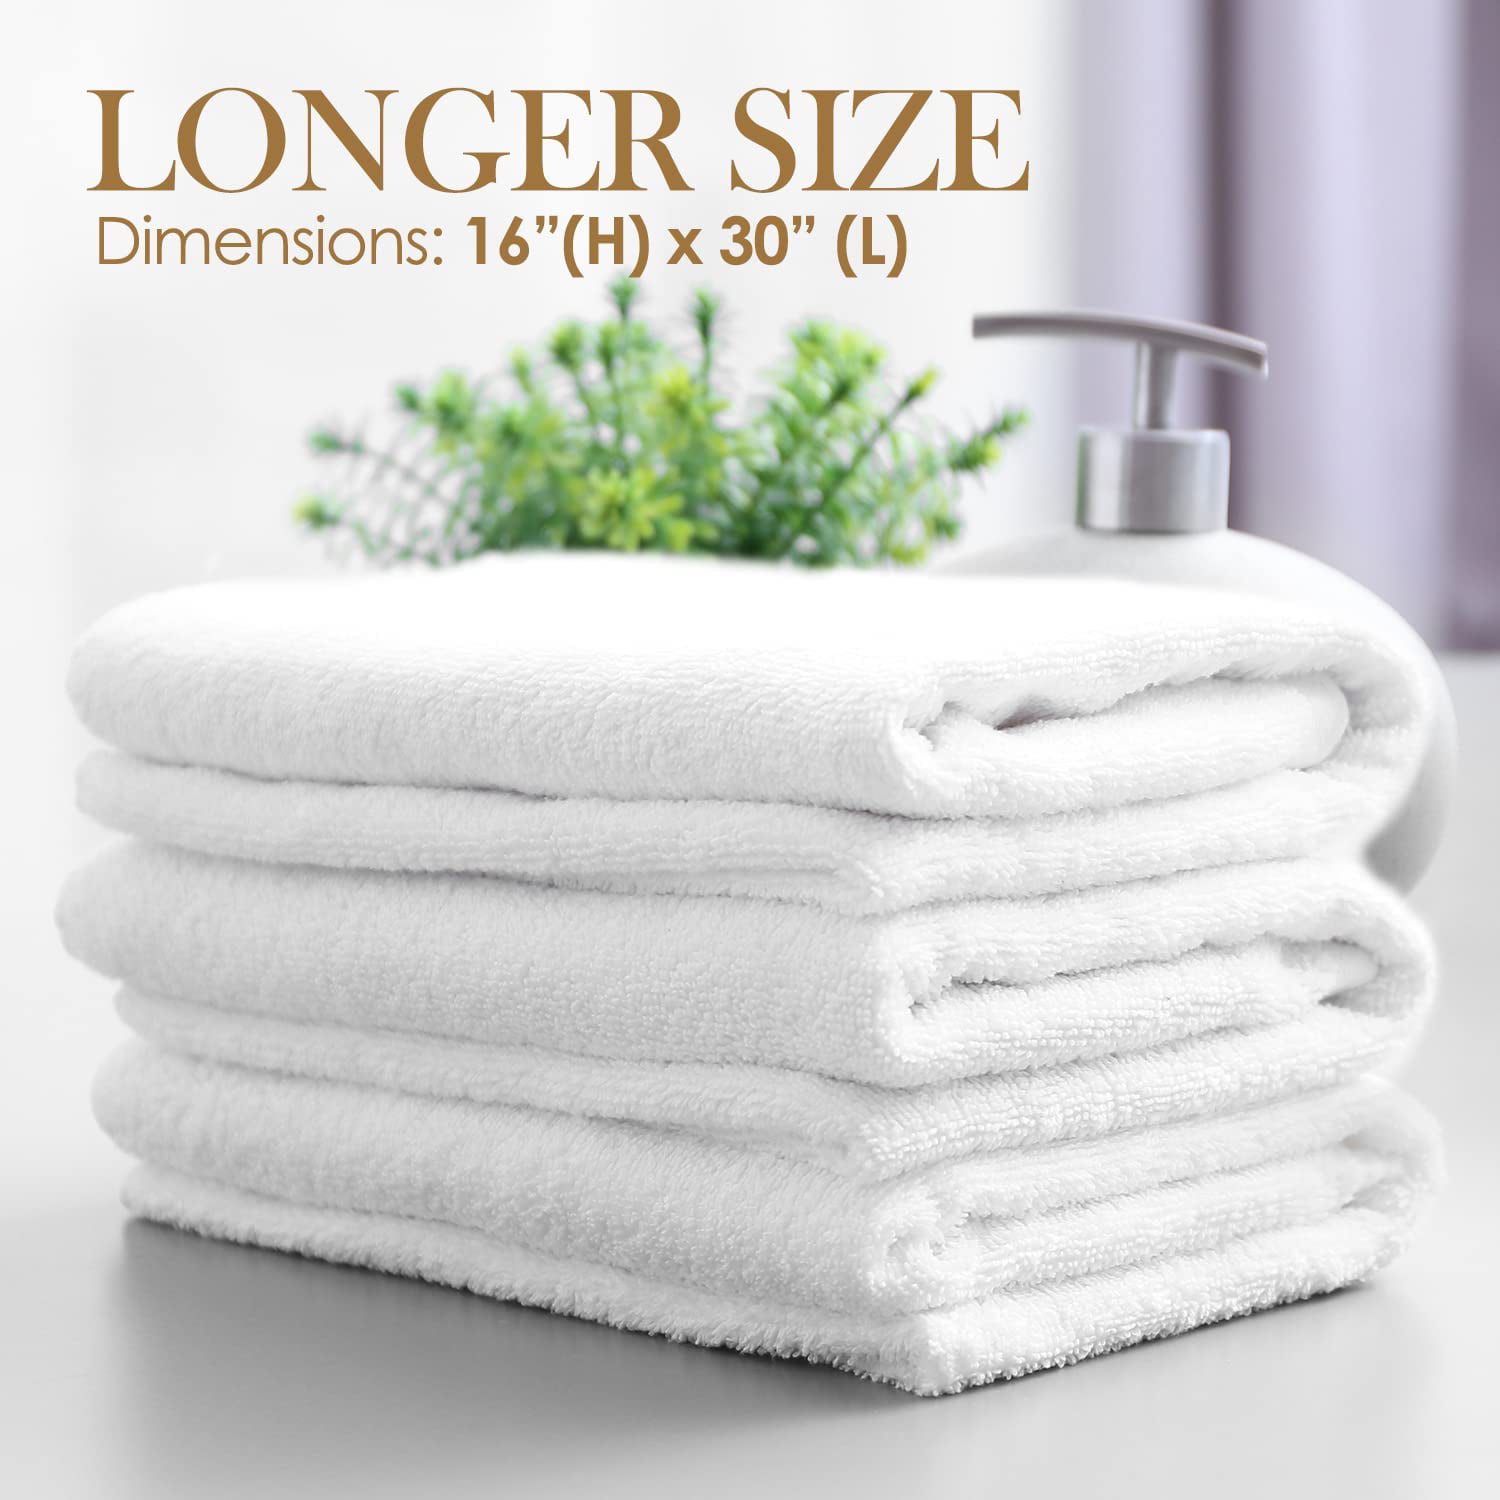 SM Home Micro Hand Towel 6 pc set (White) - 11x18in